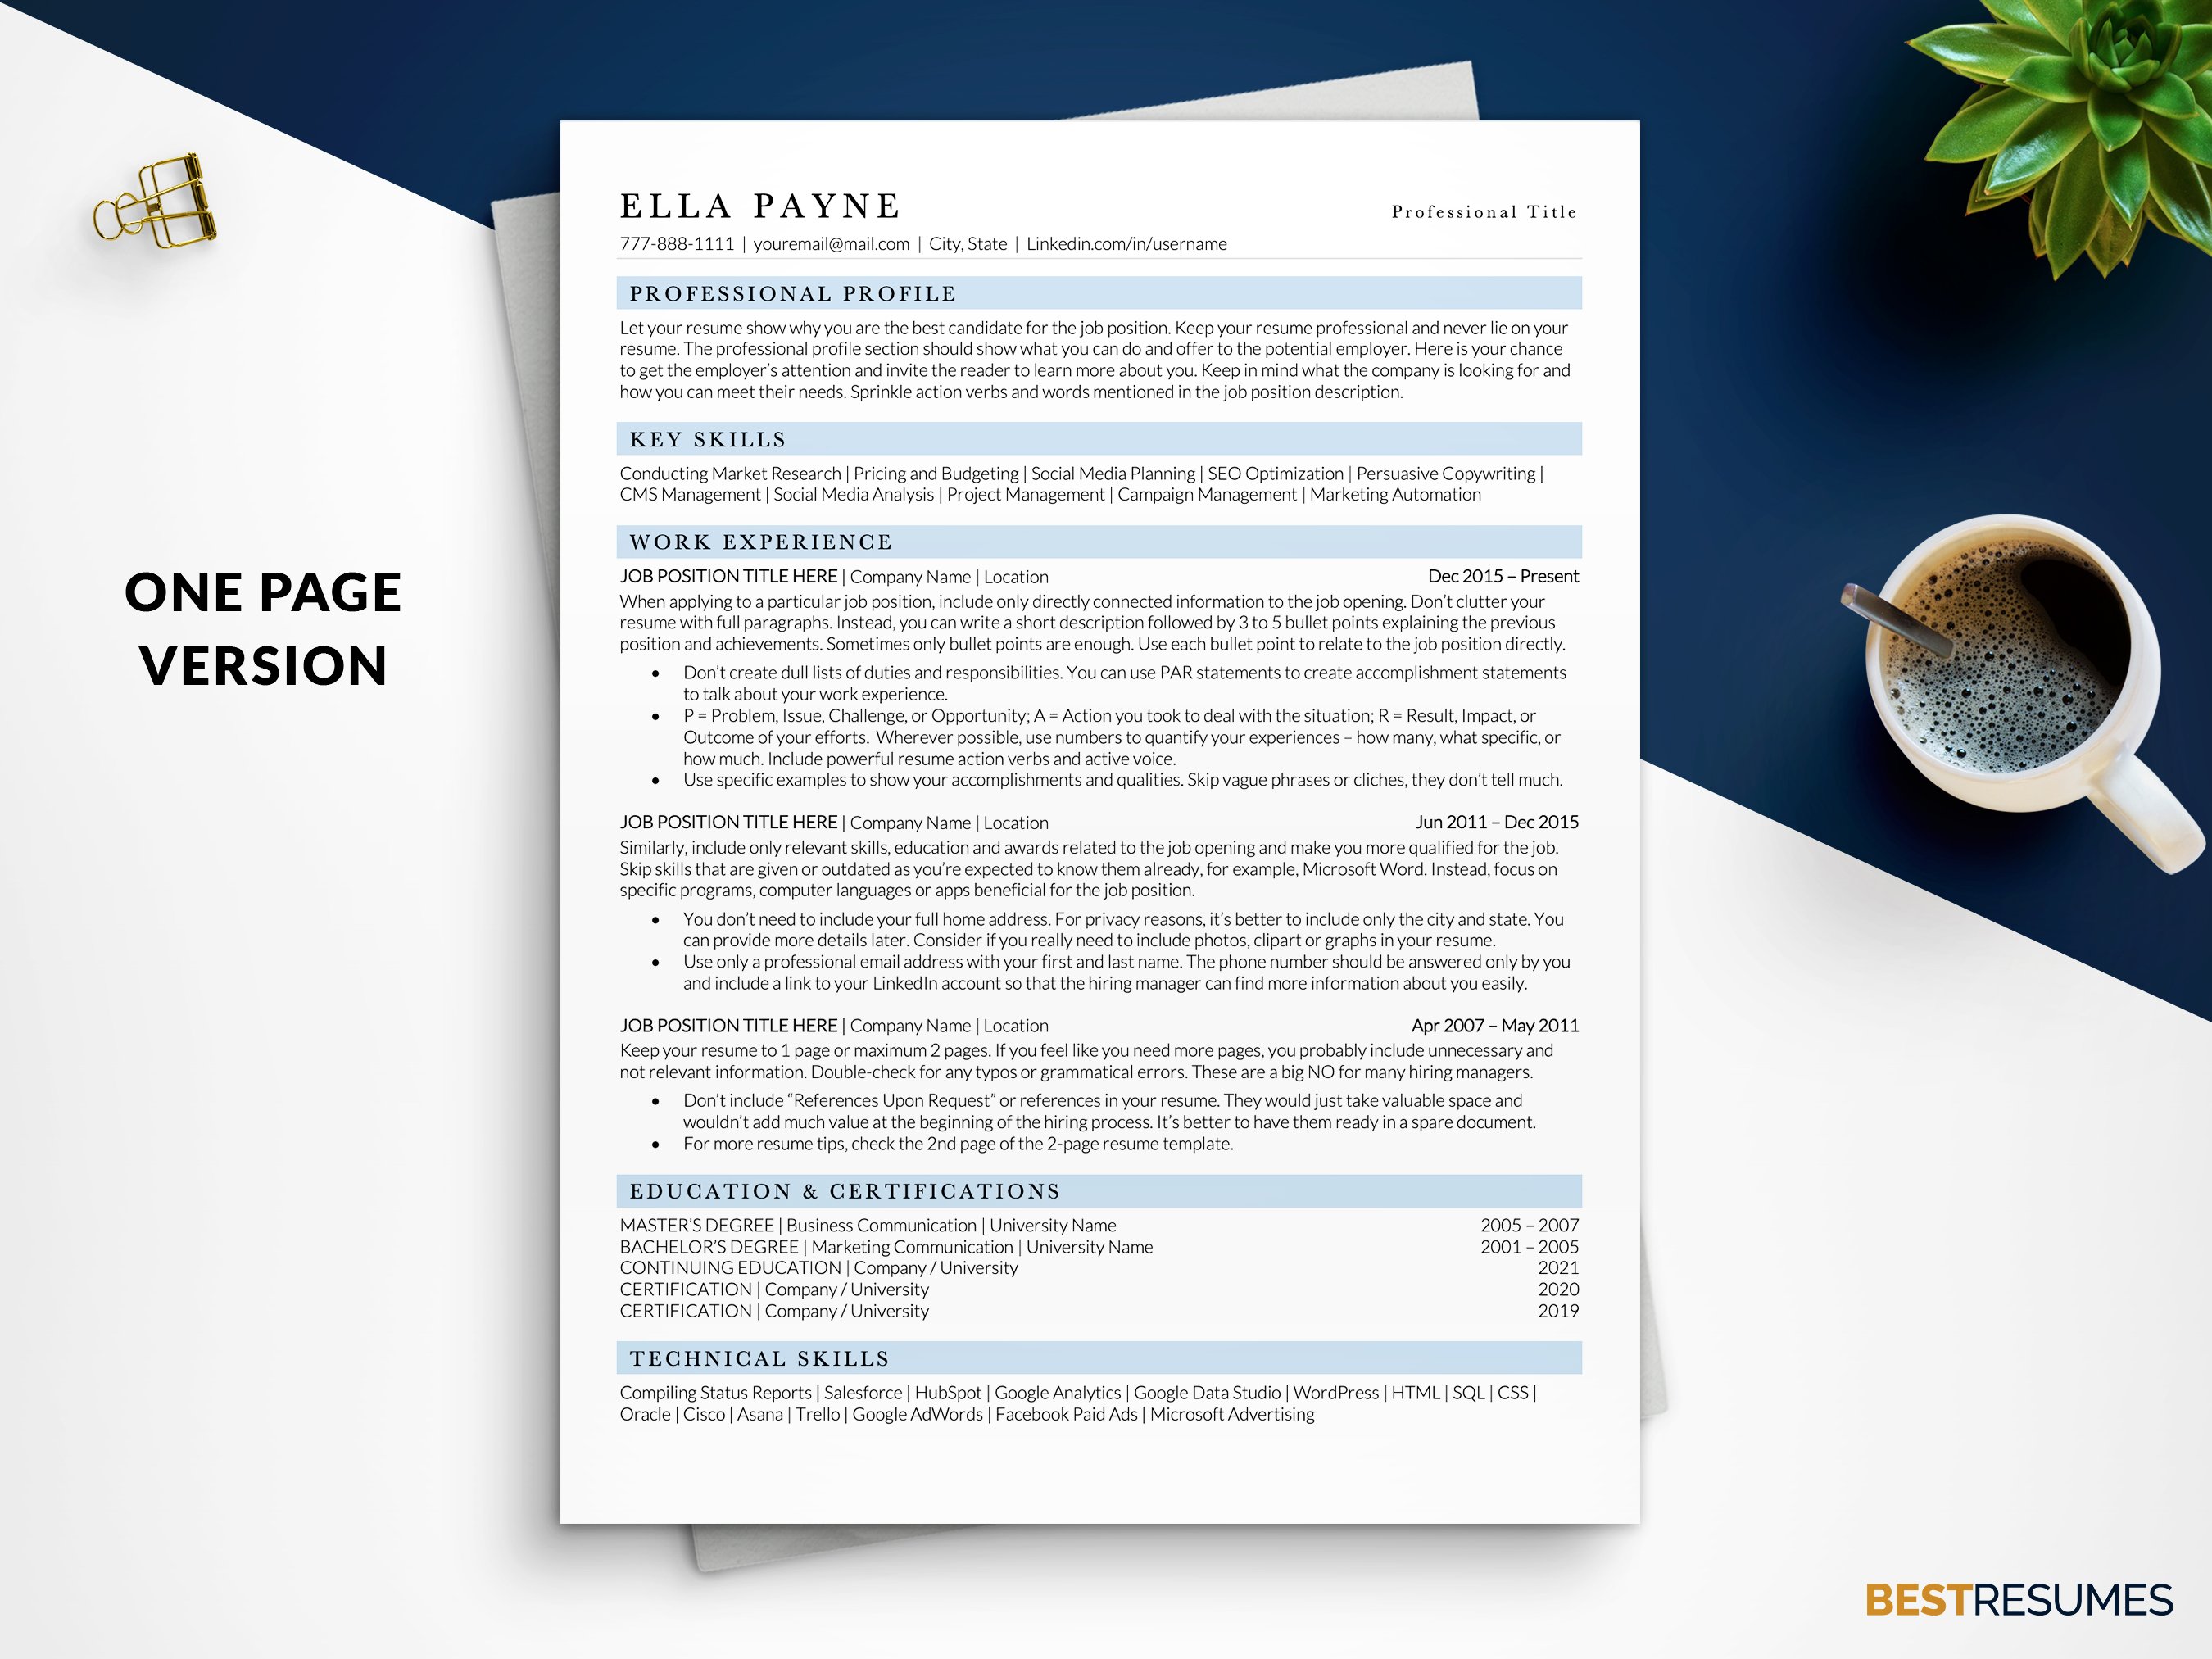 ATS Optimized Resume Template Blue preview image.